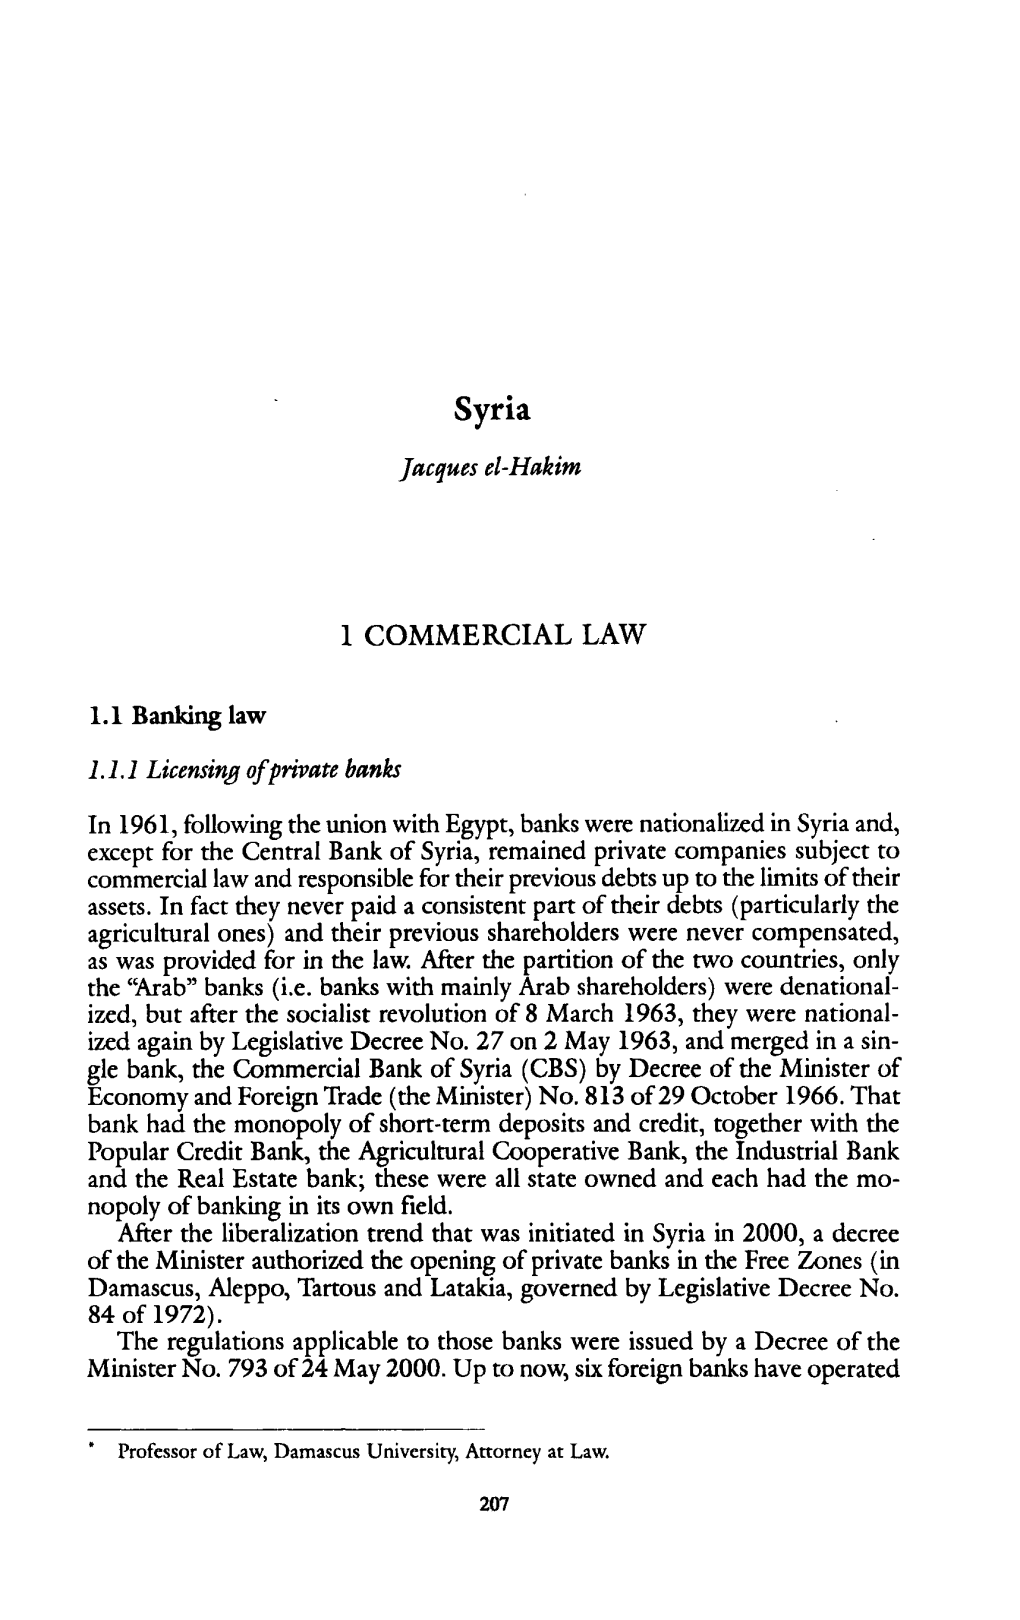 Jacques El-Hakim 1 COMMERCIAL LAW 1.1 Banking Law 1.1.1 Licensing Af Private Banks in 1961, Following the Union with Egypt, Bank